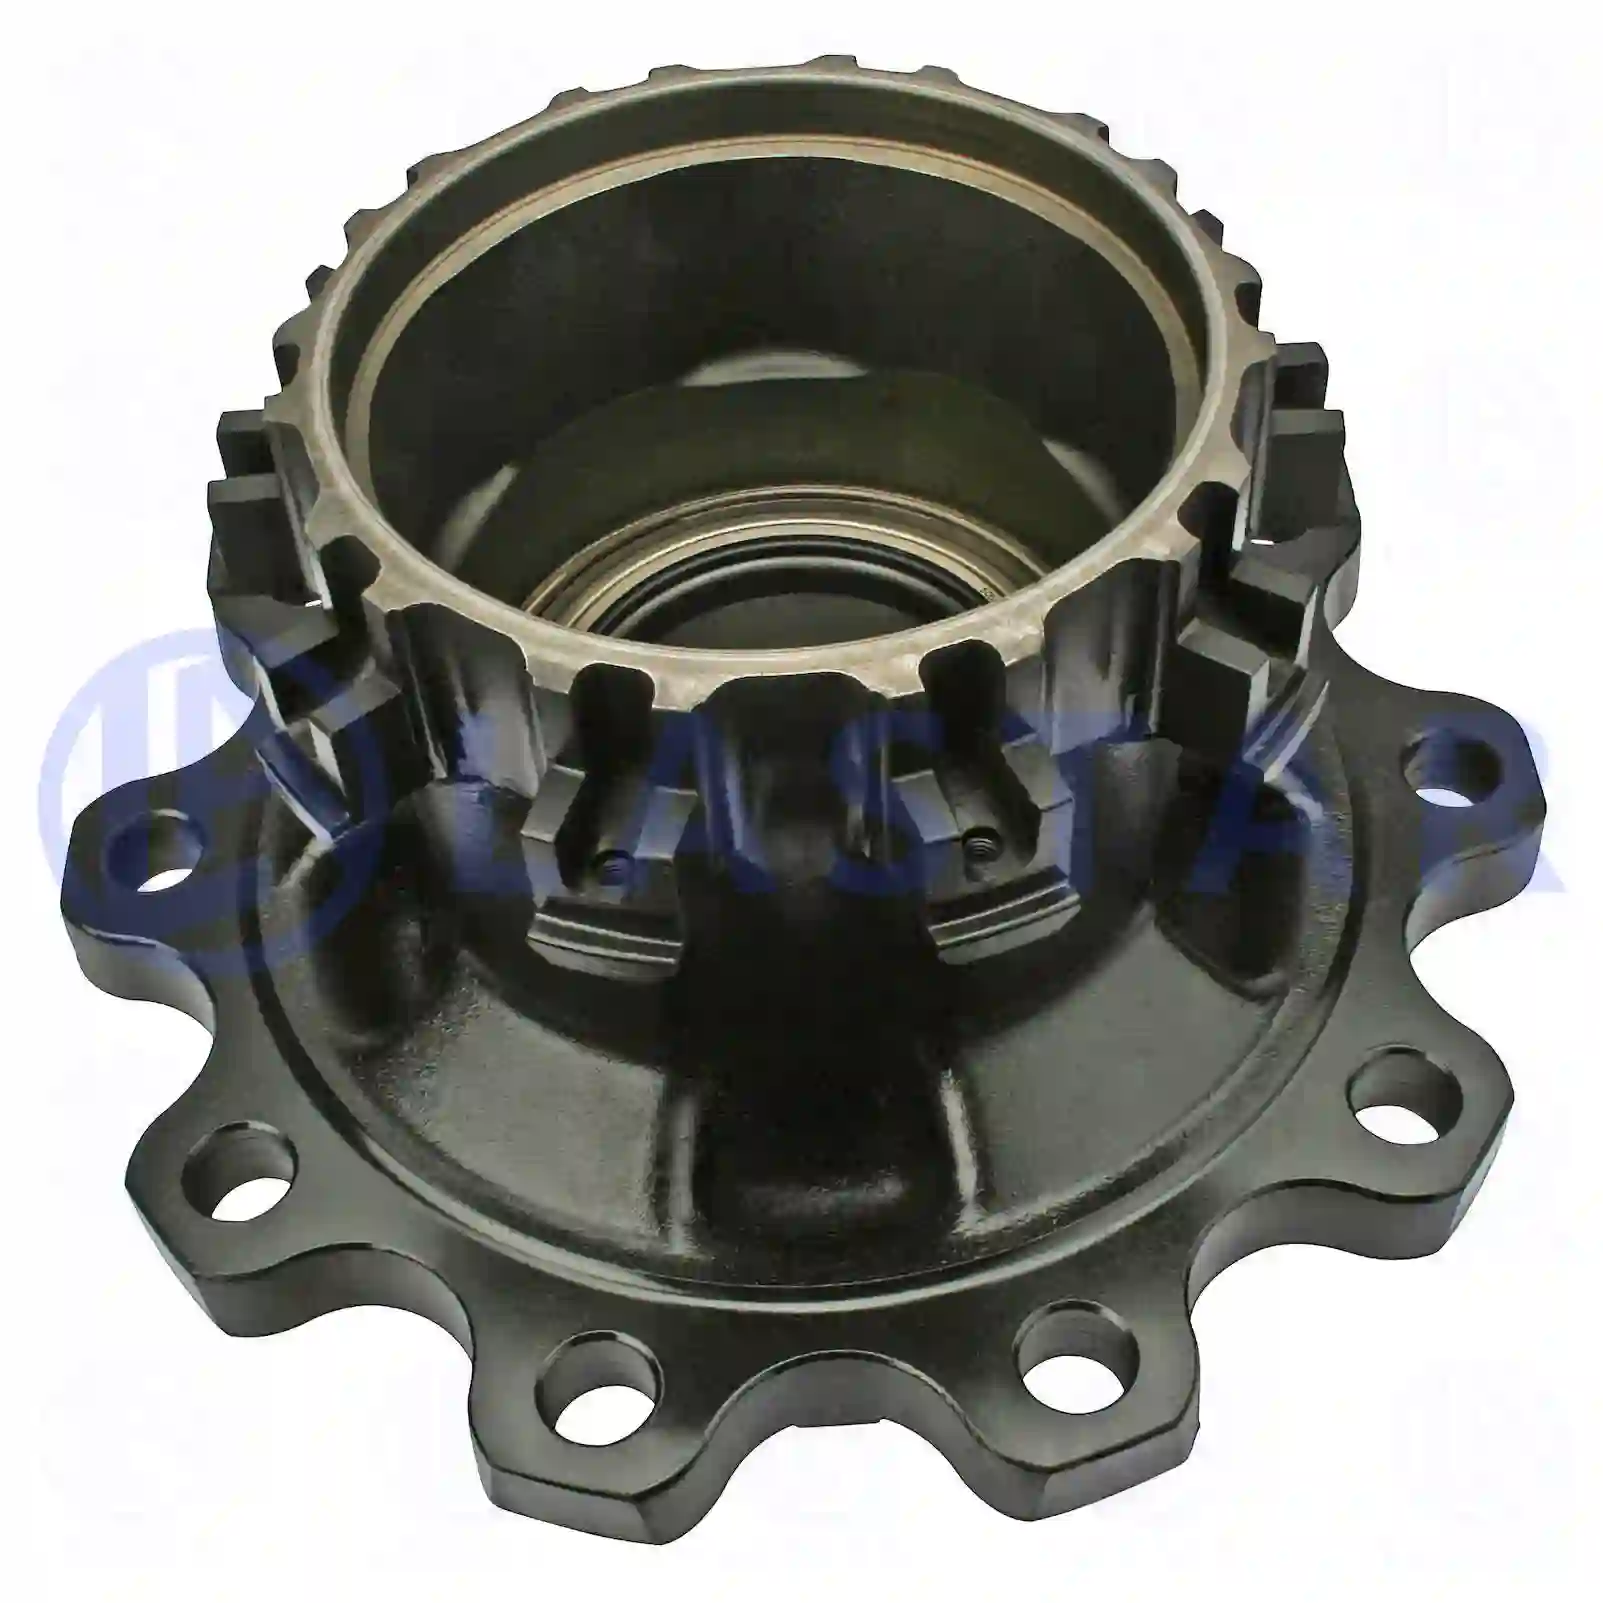 Wheel hub, without bearings, 77726538, 1388906S, 1391617S, 1818003S, , , , ||  77726538 Lastar Spare Part | Truck Spare Parts, Auotomotive Spare Parts Wheel hub, without bearings, 77726538, 1388906S, 1391617S, 1818003S, , , , ||  77726538 Lastar Spare Part | Truck Spare Parts, Auotomotive Spare Parts